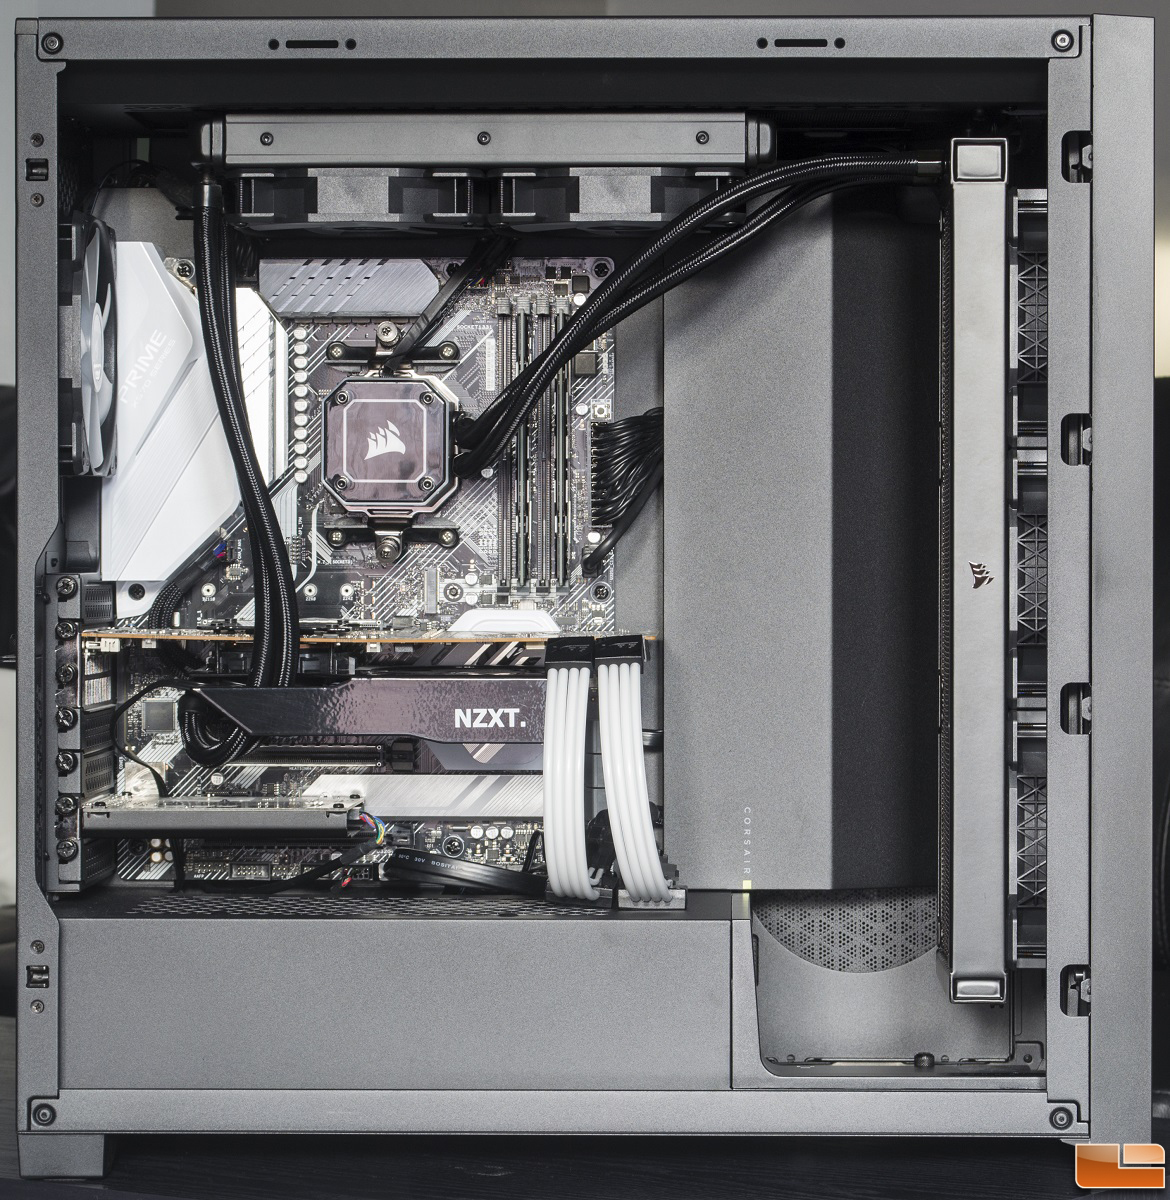 PC Build: Are Velcro straps safe for cable management?